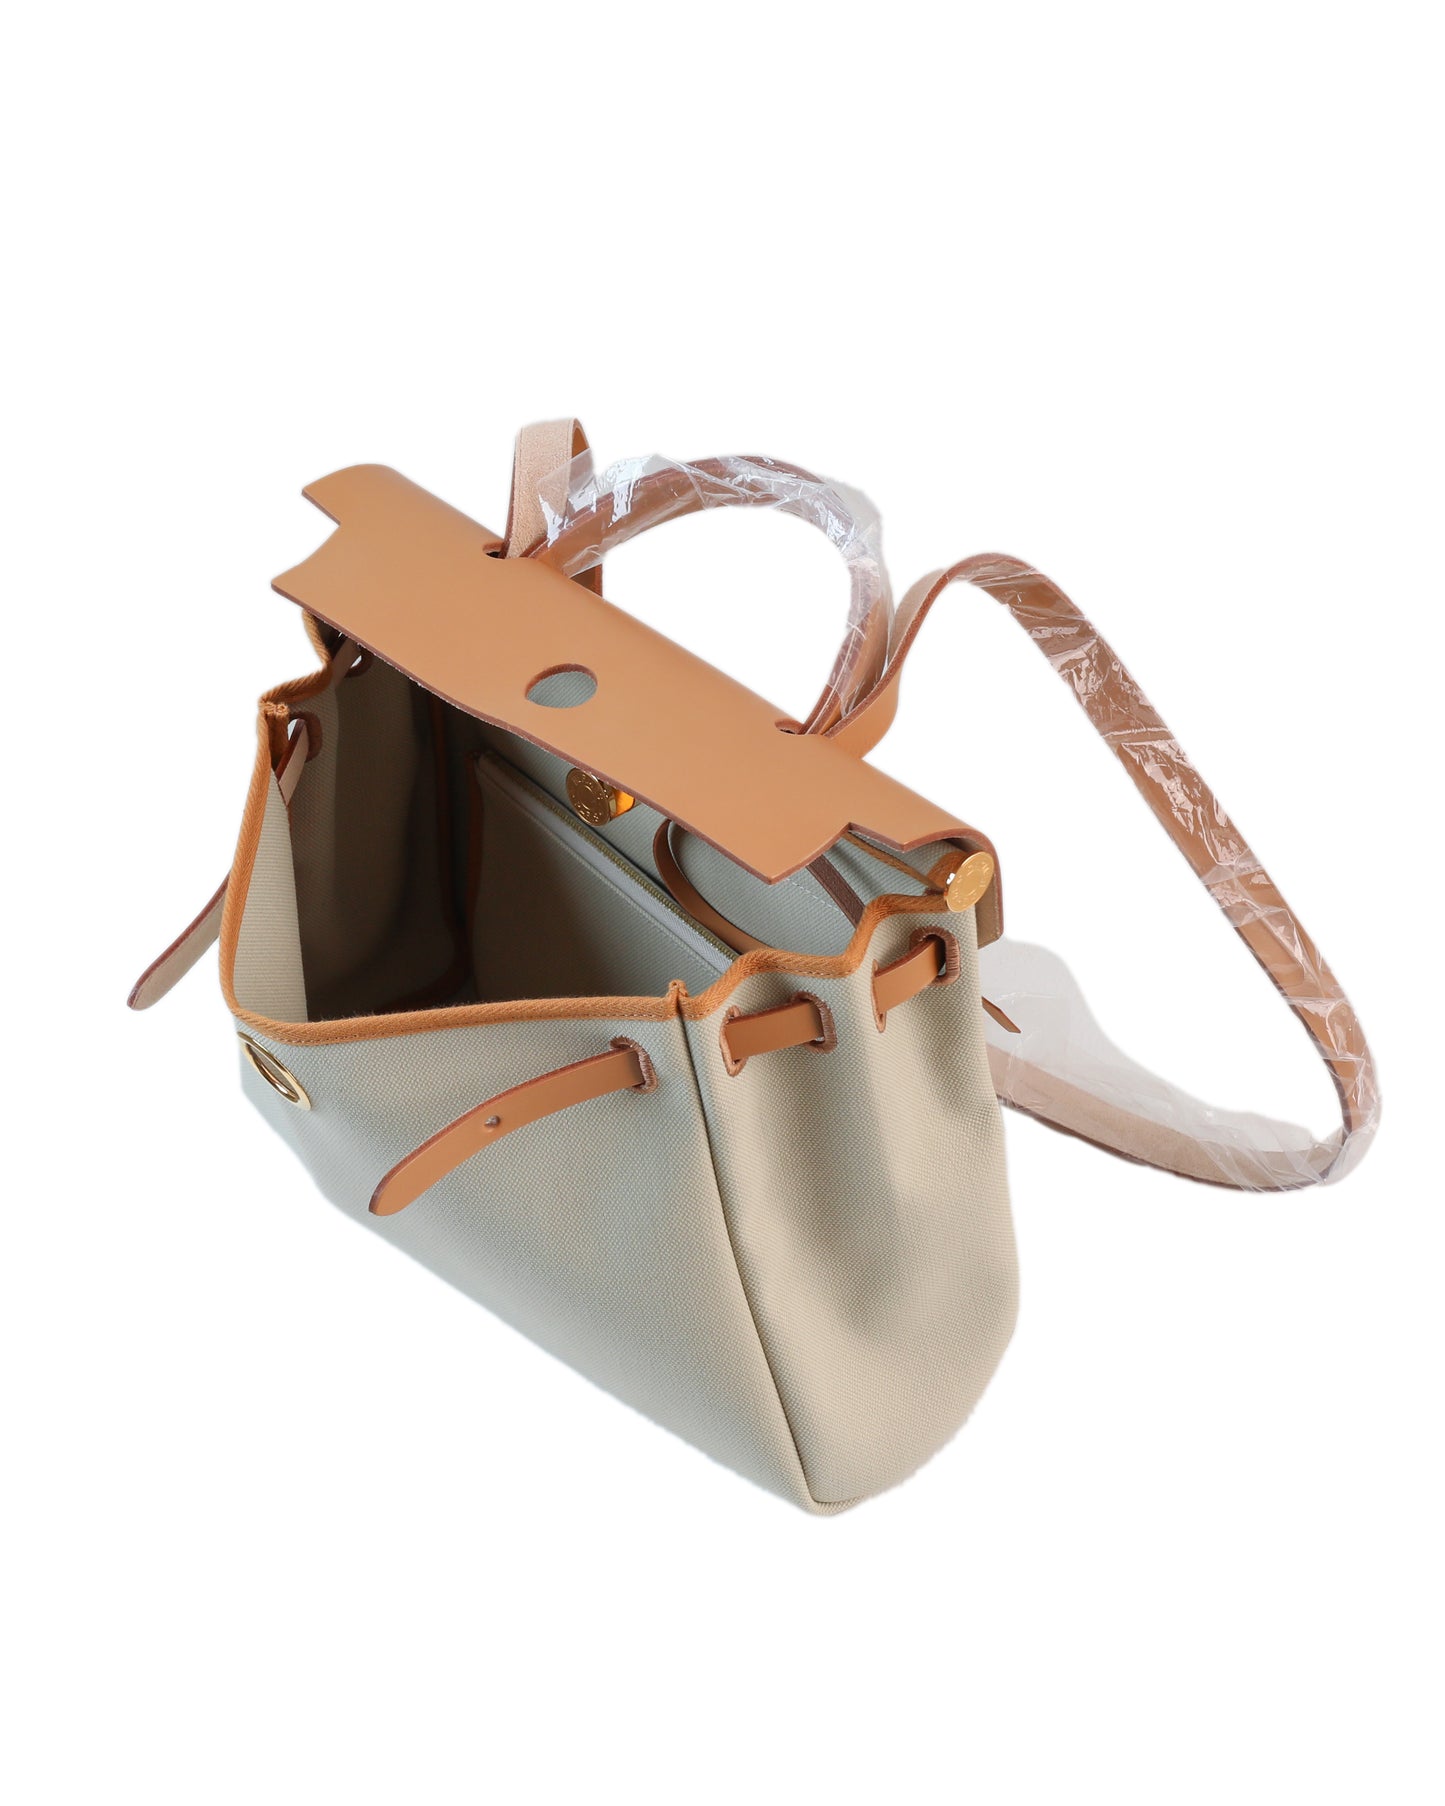 Herbag Zip 31 in Natural Vache Hunter and Beton Toile with Gold Hardware